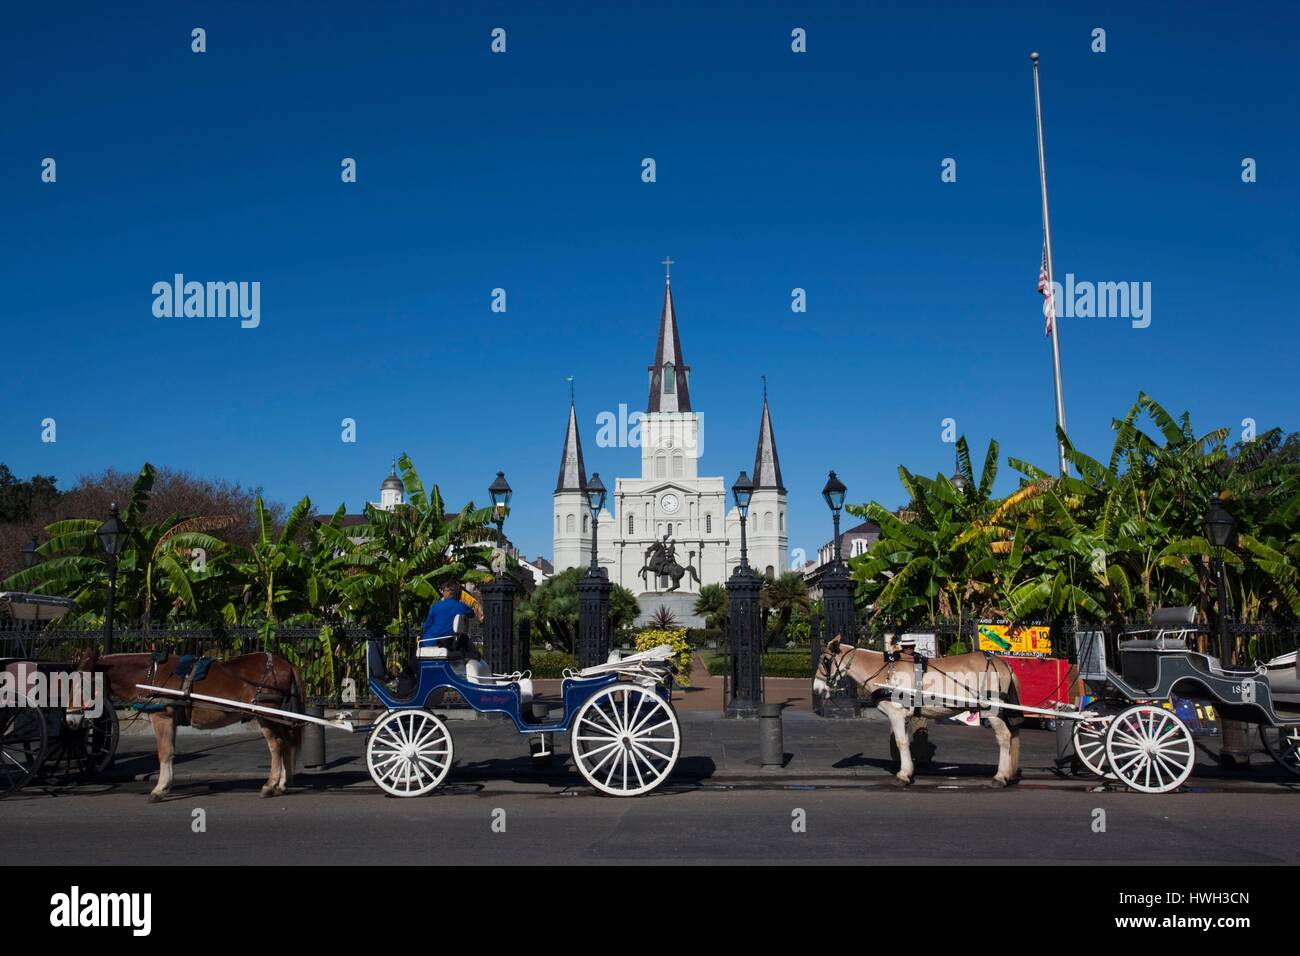 USA, Louisiana, New Orleans, French Quarter, Jackson Square, St. Louis Cathedral und Horse-drawn Wagen Stockfoto